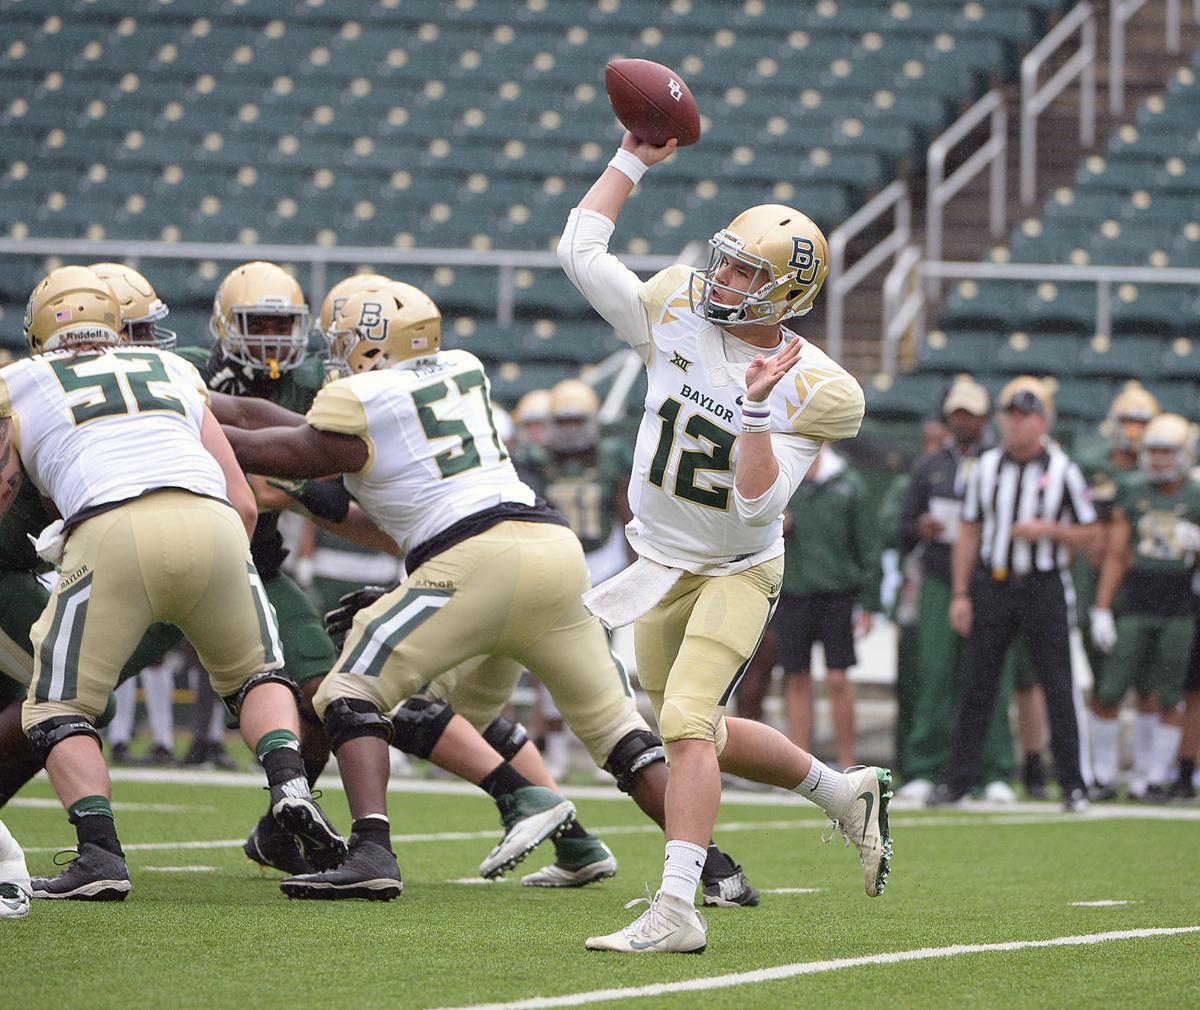 Bears show glimpse of potential in spring game | Baylor Bears Football